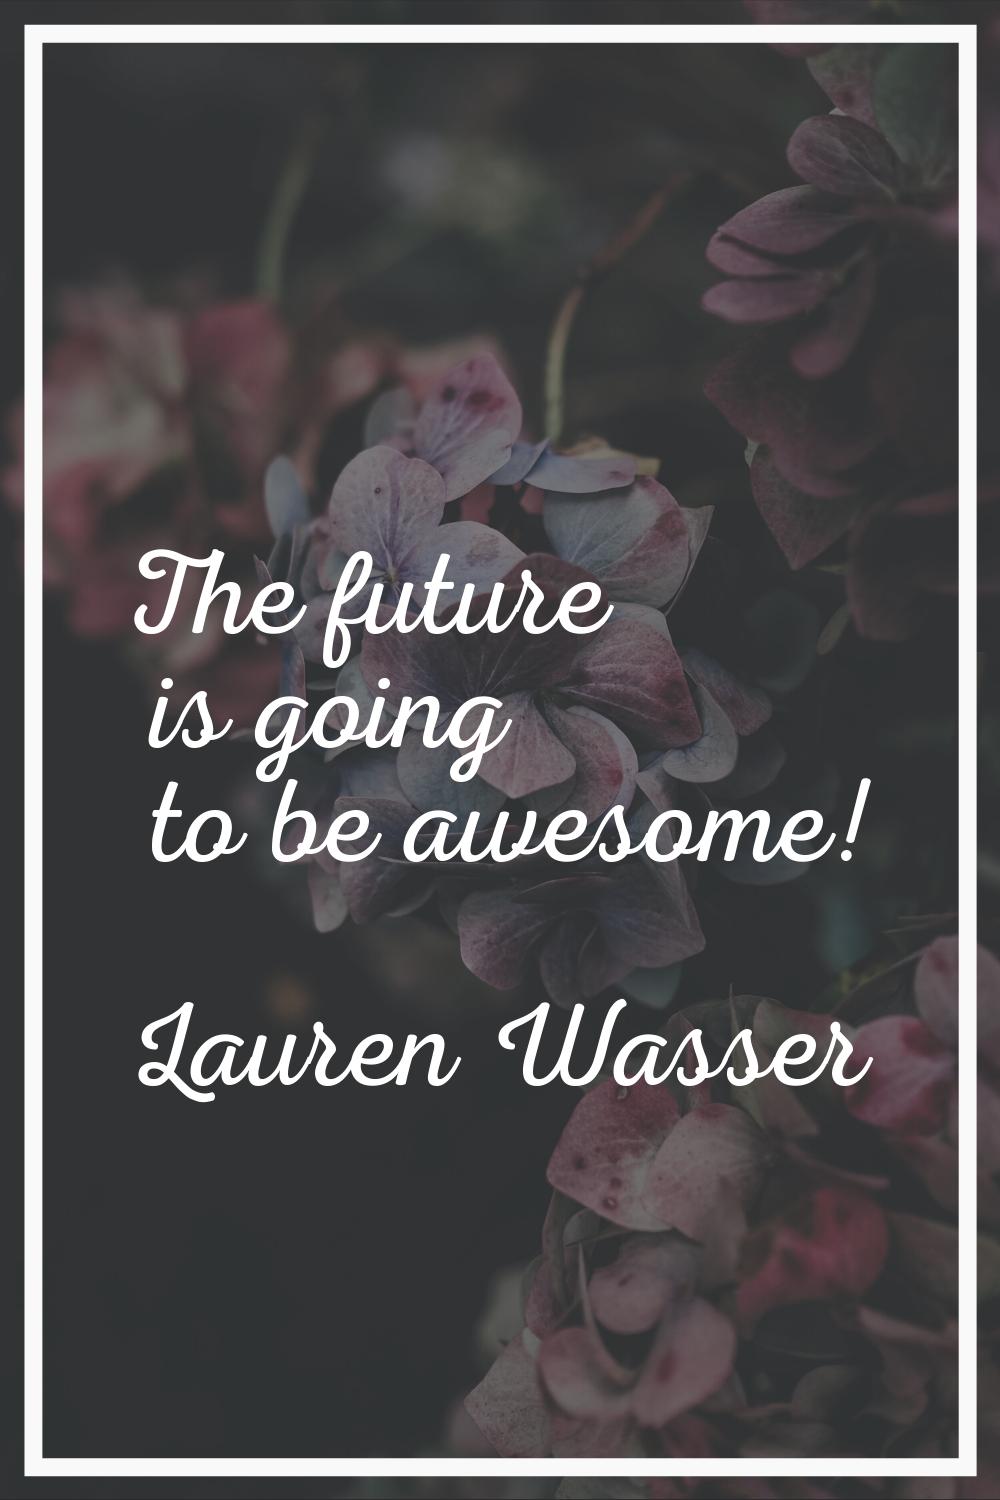 The future is going to be awesome!